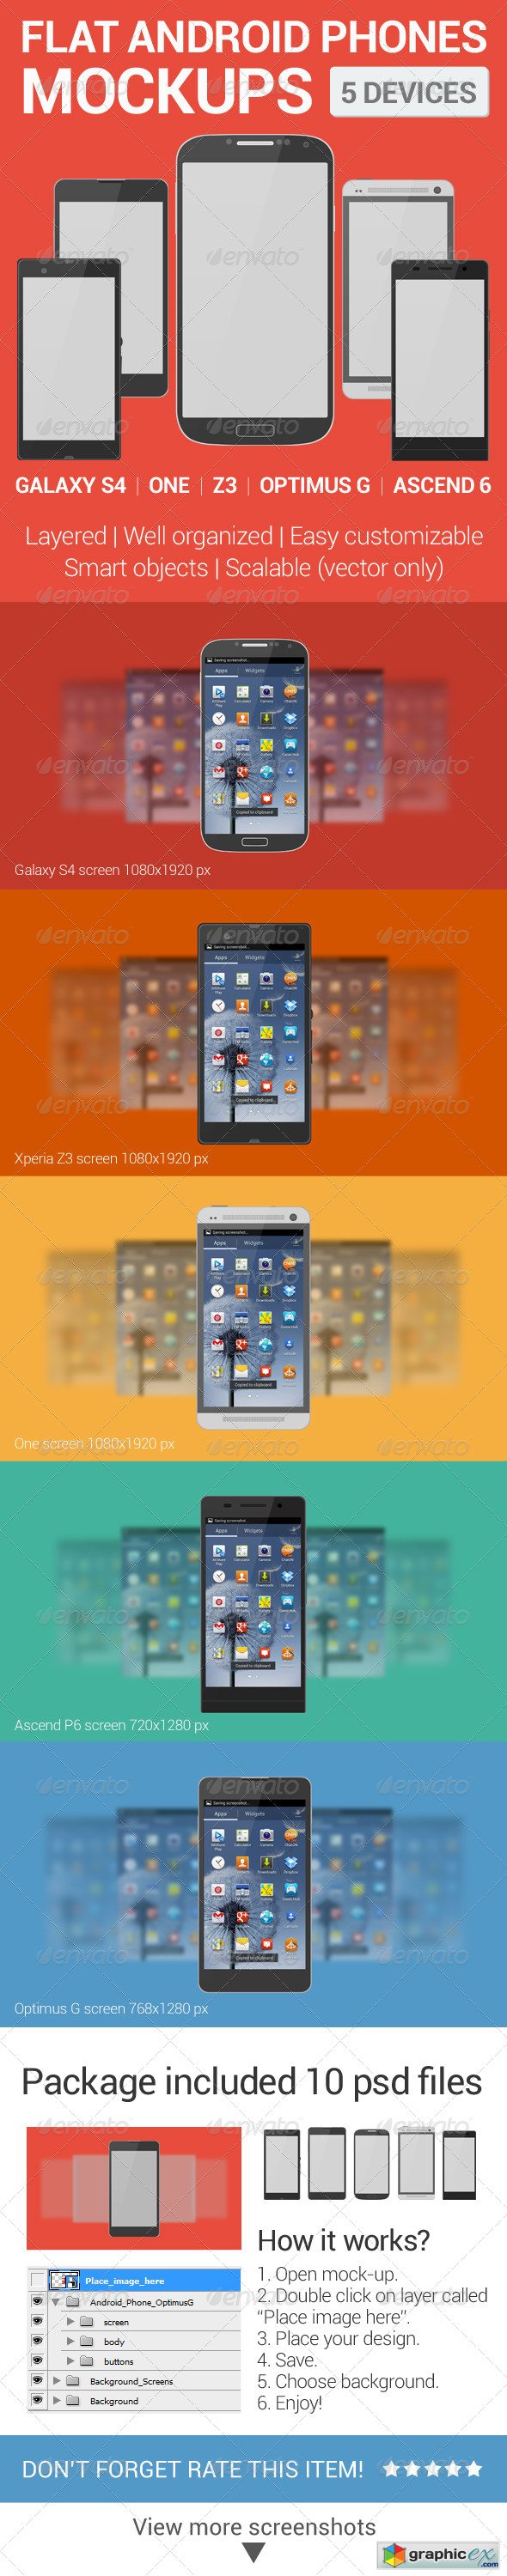 Android Phones Flat Mockups